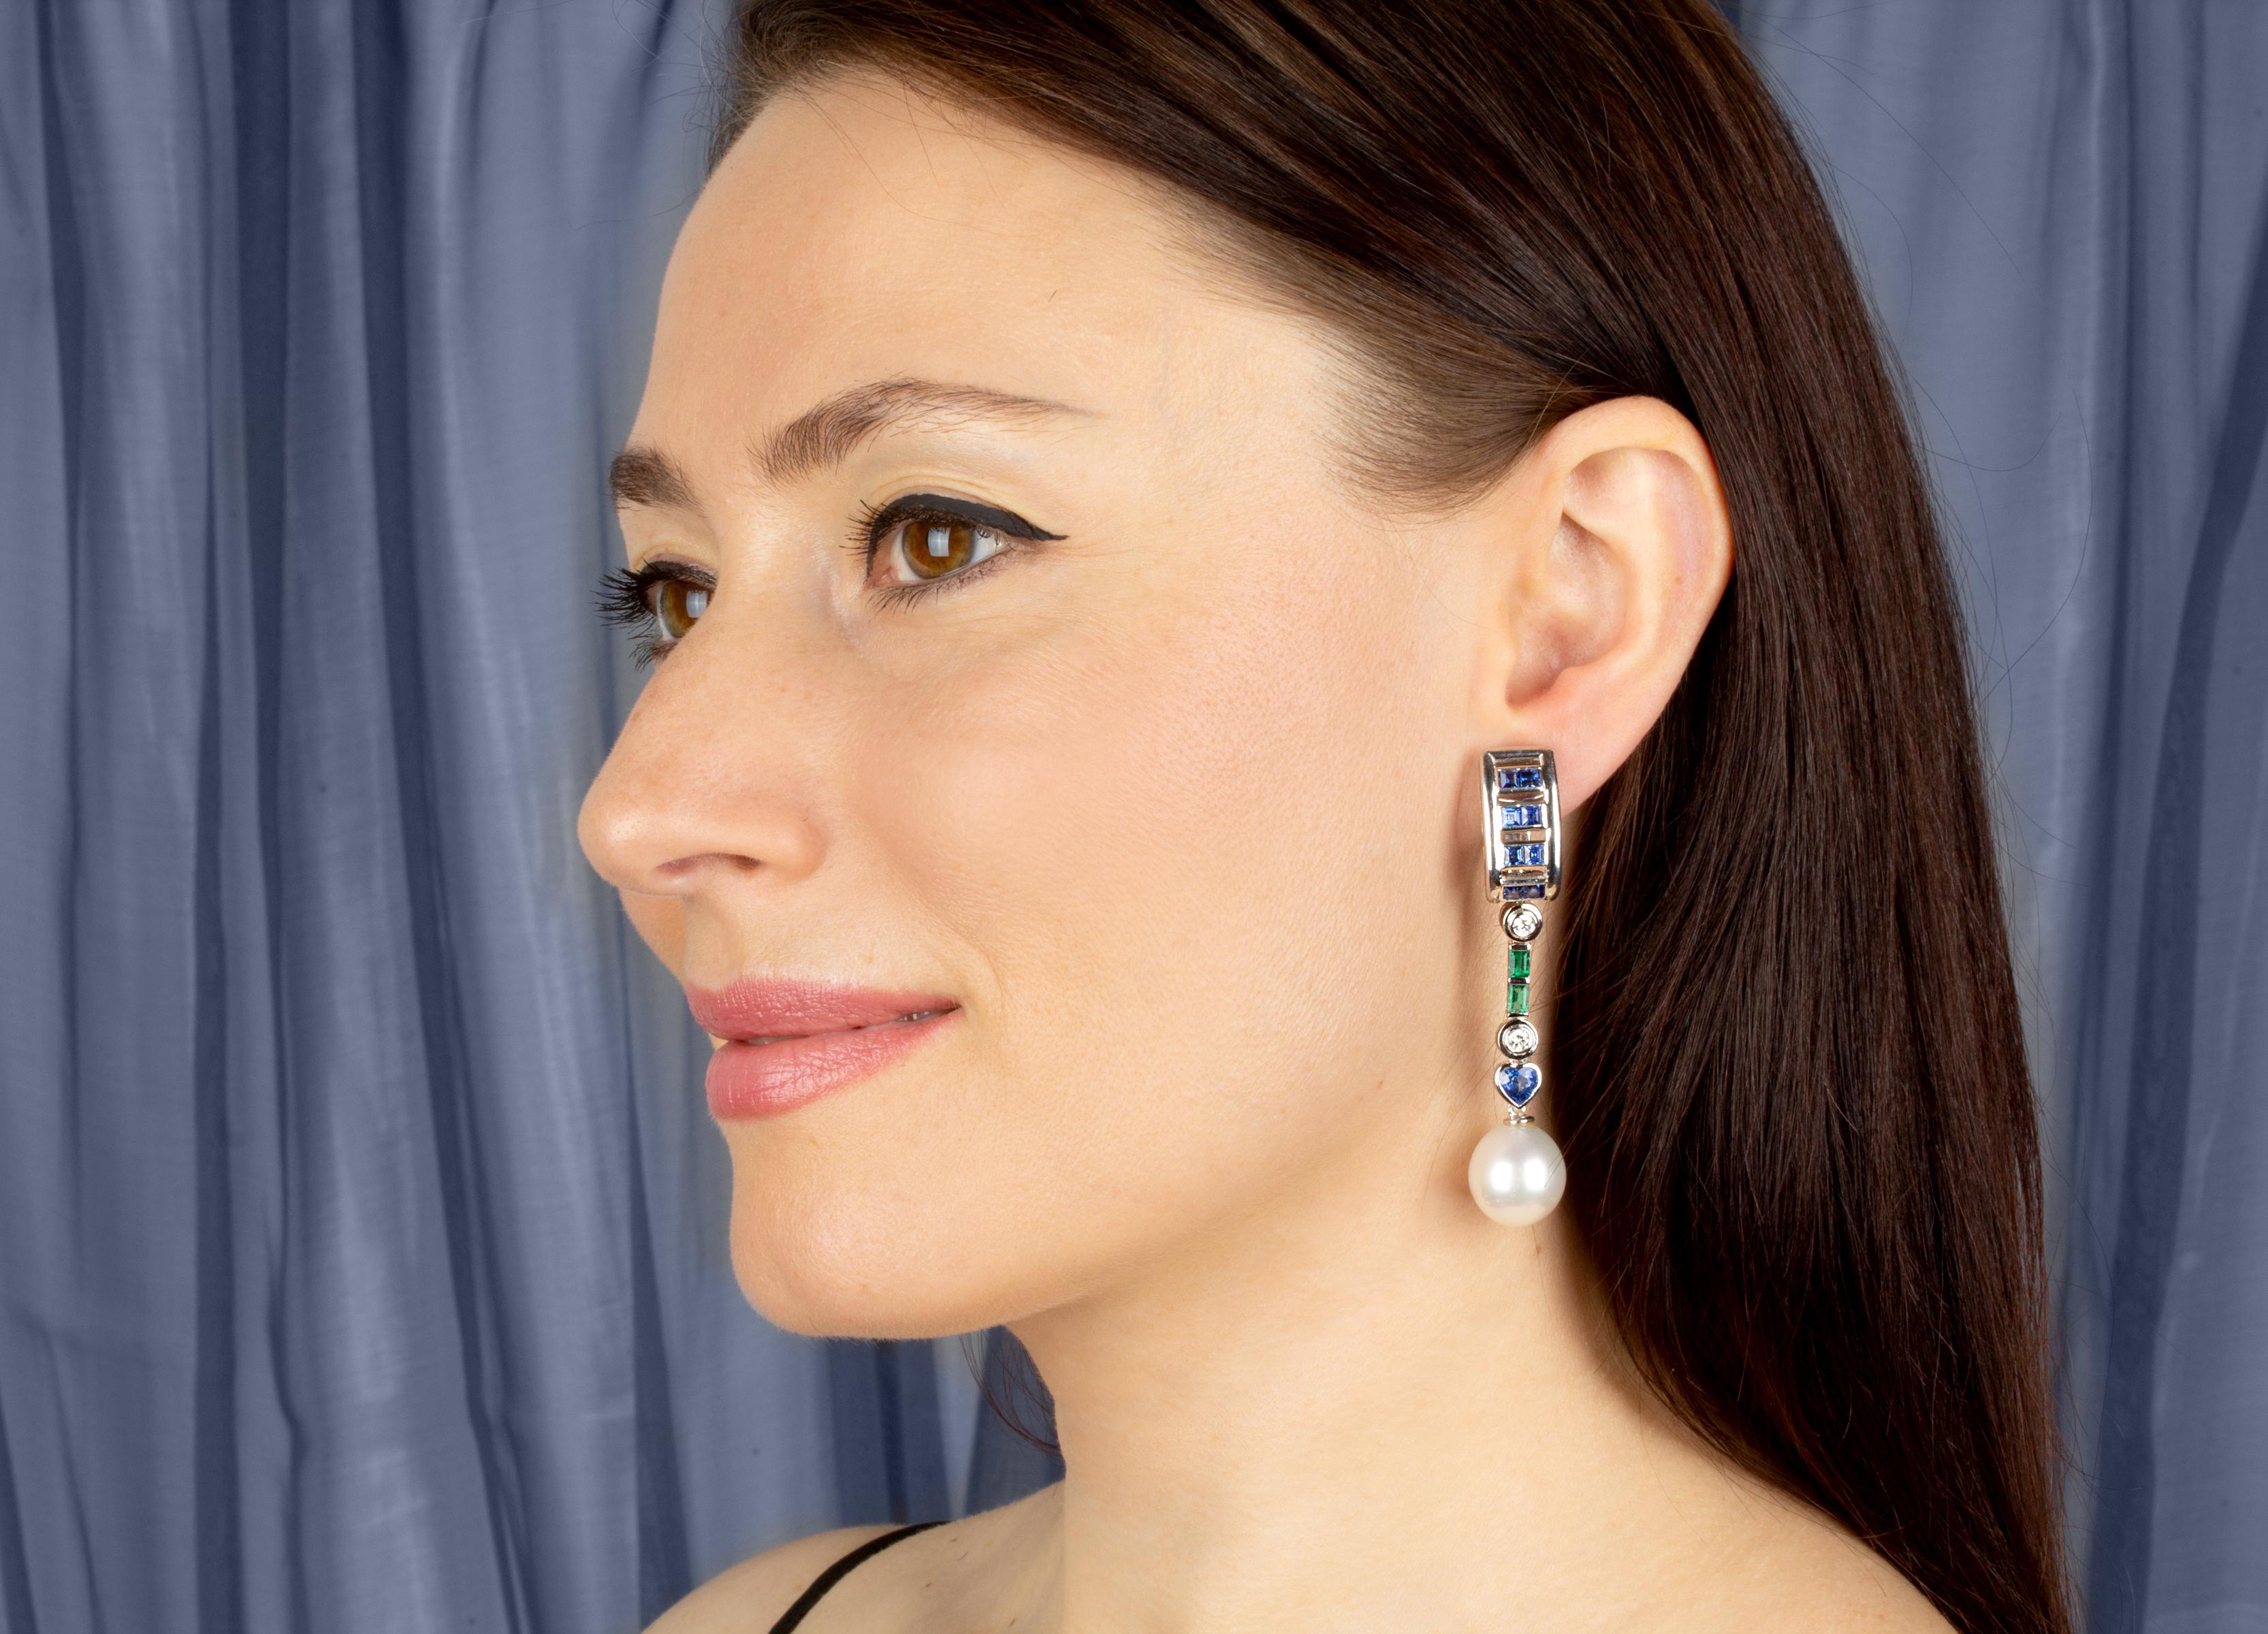 The sapphire and pearl earrings features a hoop-like design on the ear set with faceted blue sapphires. The tops suspend an articulated column set with round diamonds, emeralds, and heart shape sapphires. The total weight of blue sapphire is 4.02,